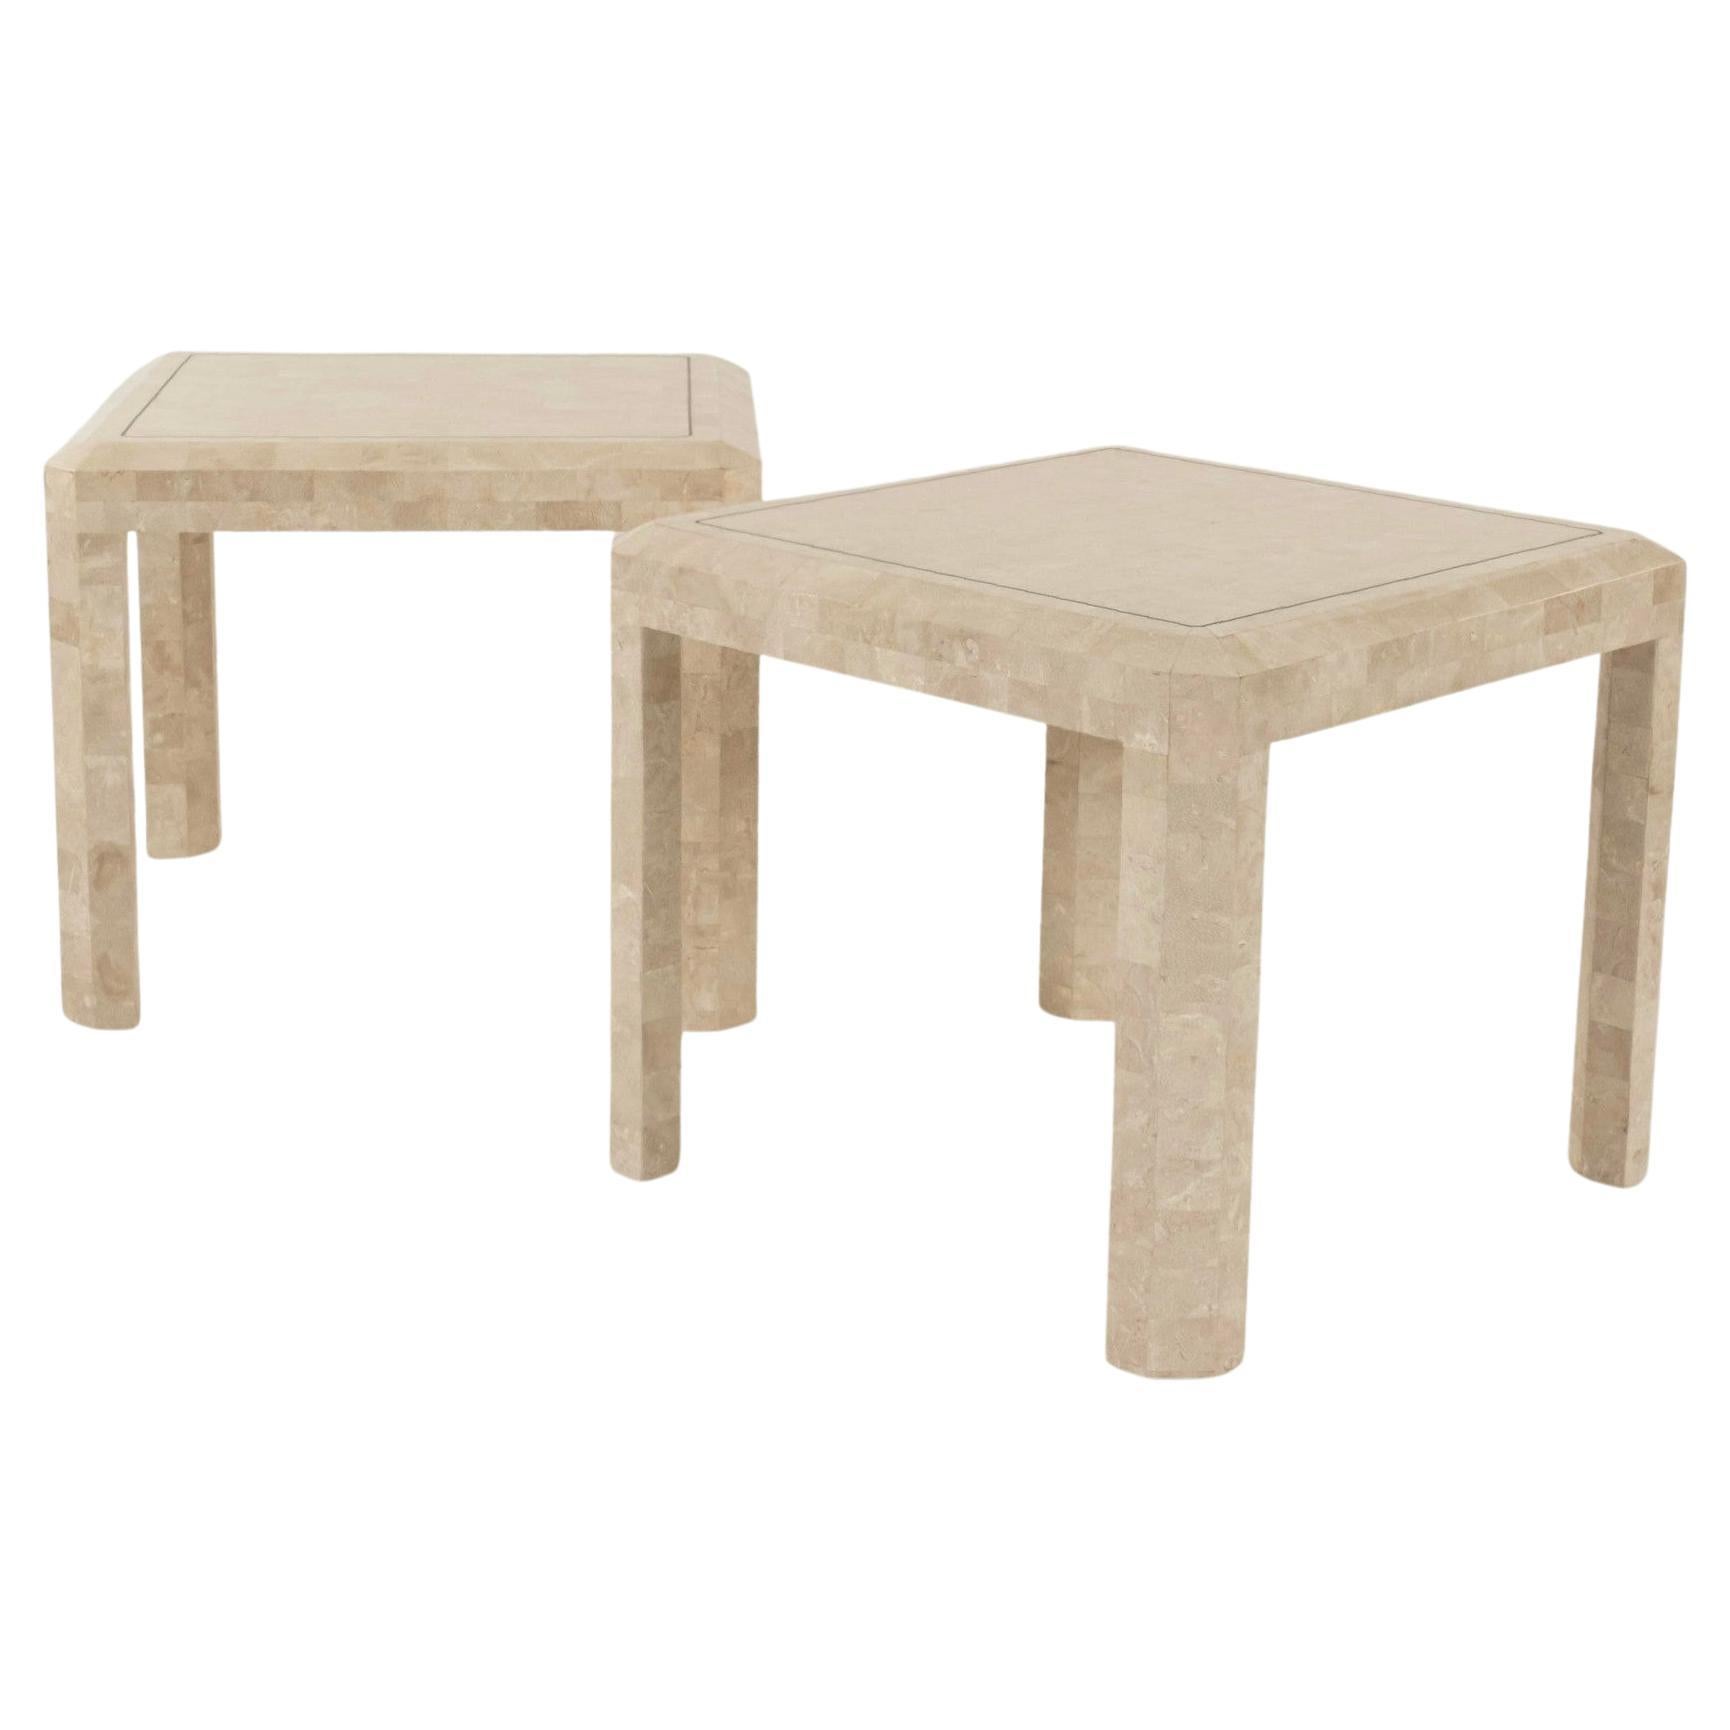 Pair Maitland Smith Tessellated Stone Brass End Tables